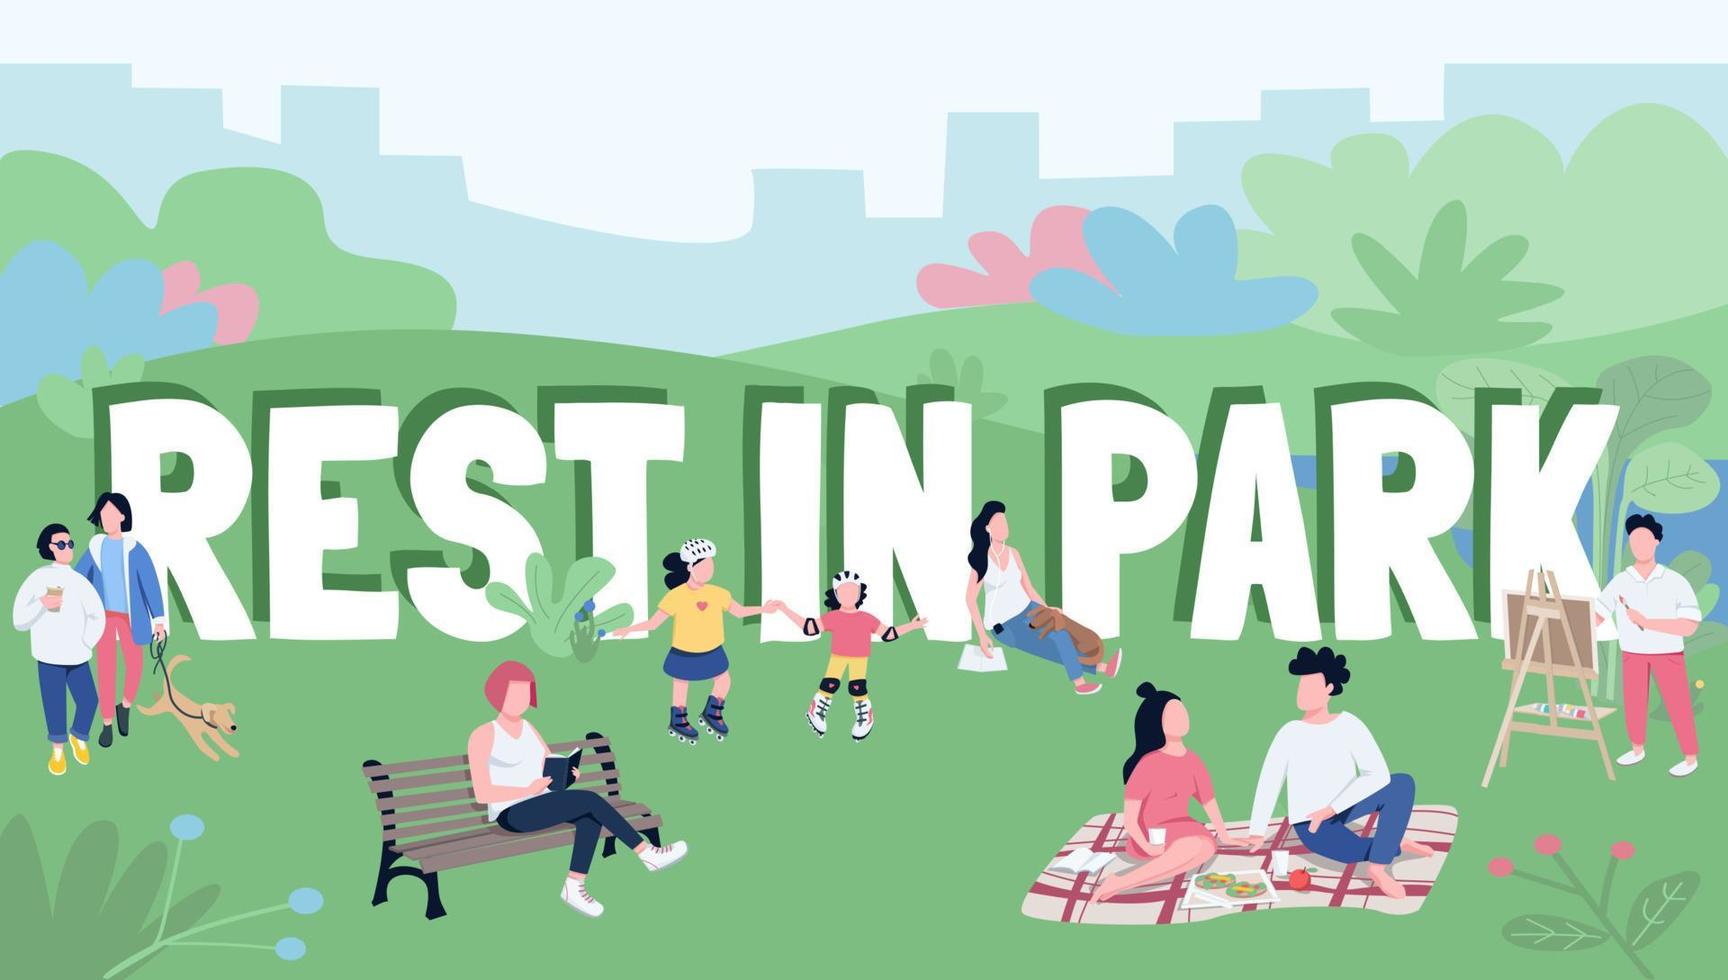 Rest in park word concepts flat color vector banner. Typography with tiny cartoon characters. Family picnic, weekend relaxation in countryside, outdoor recreation creative illustration